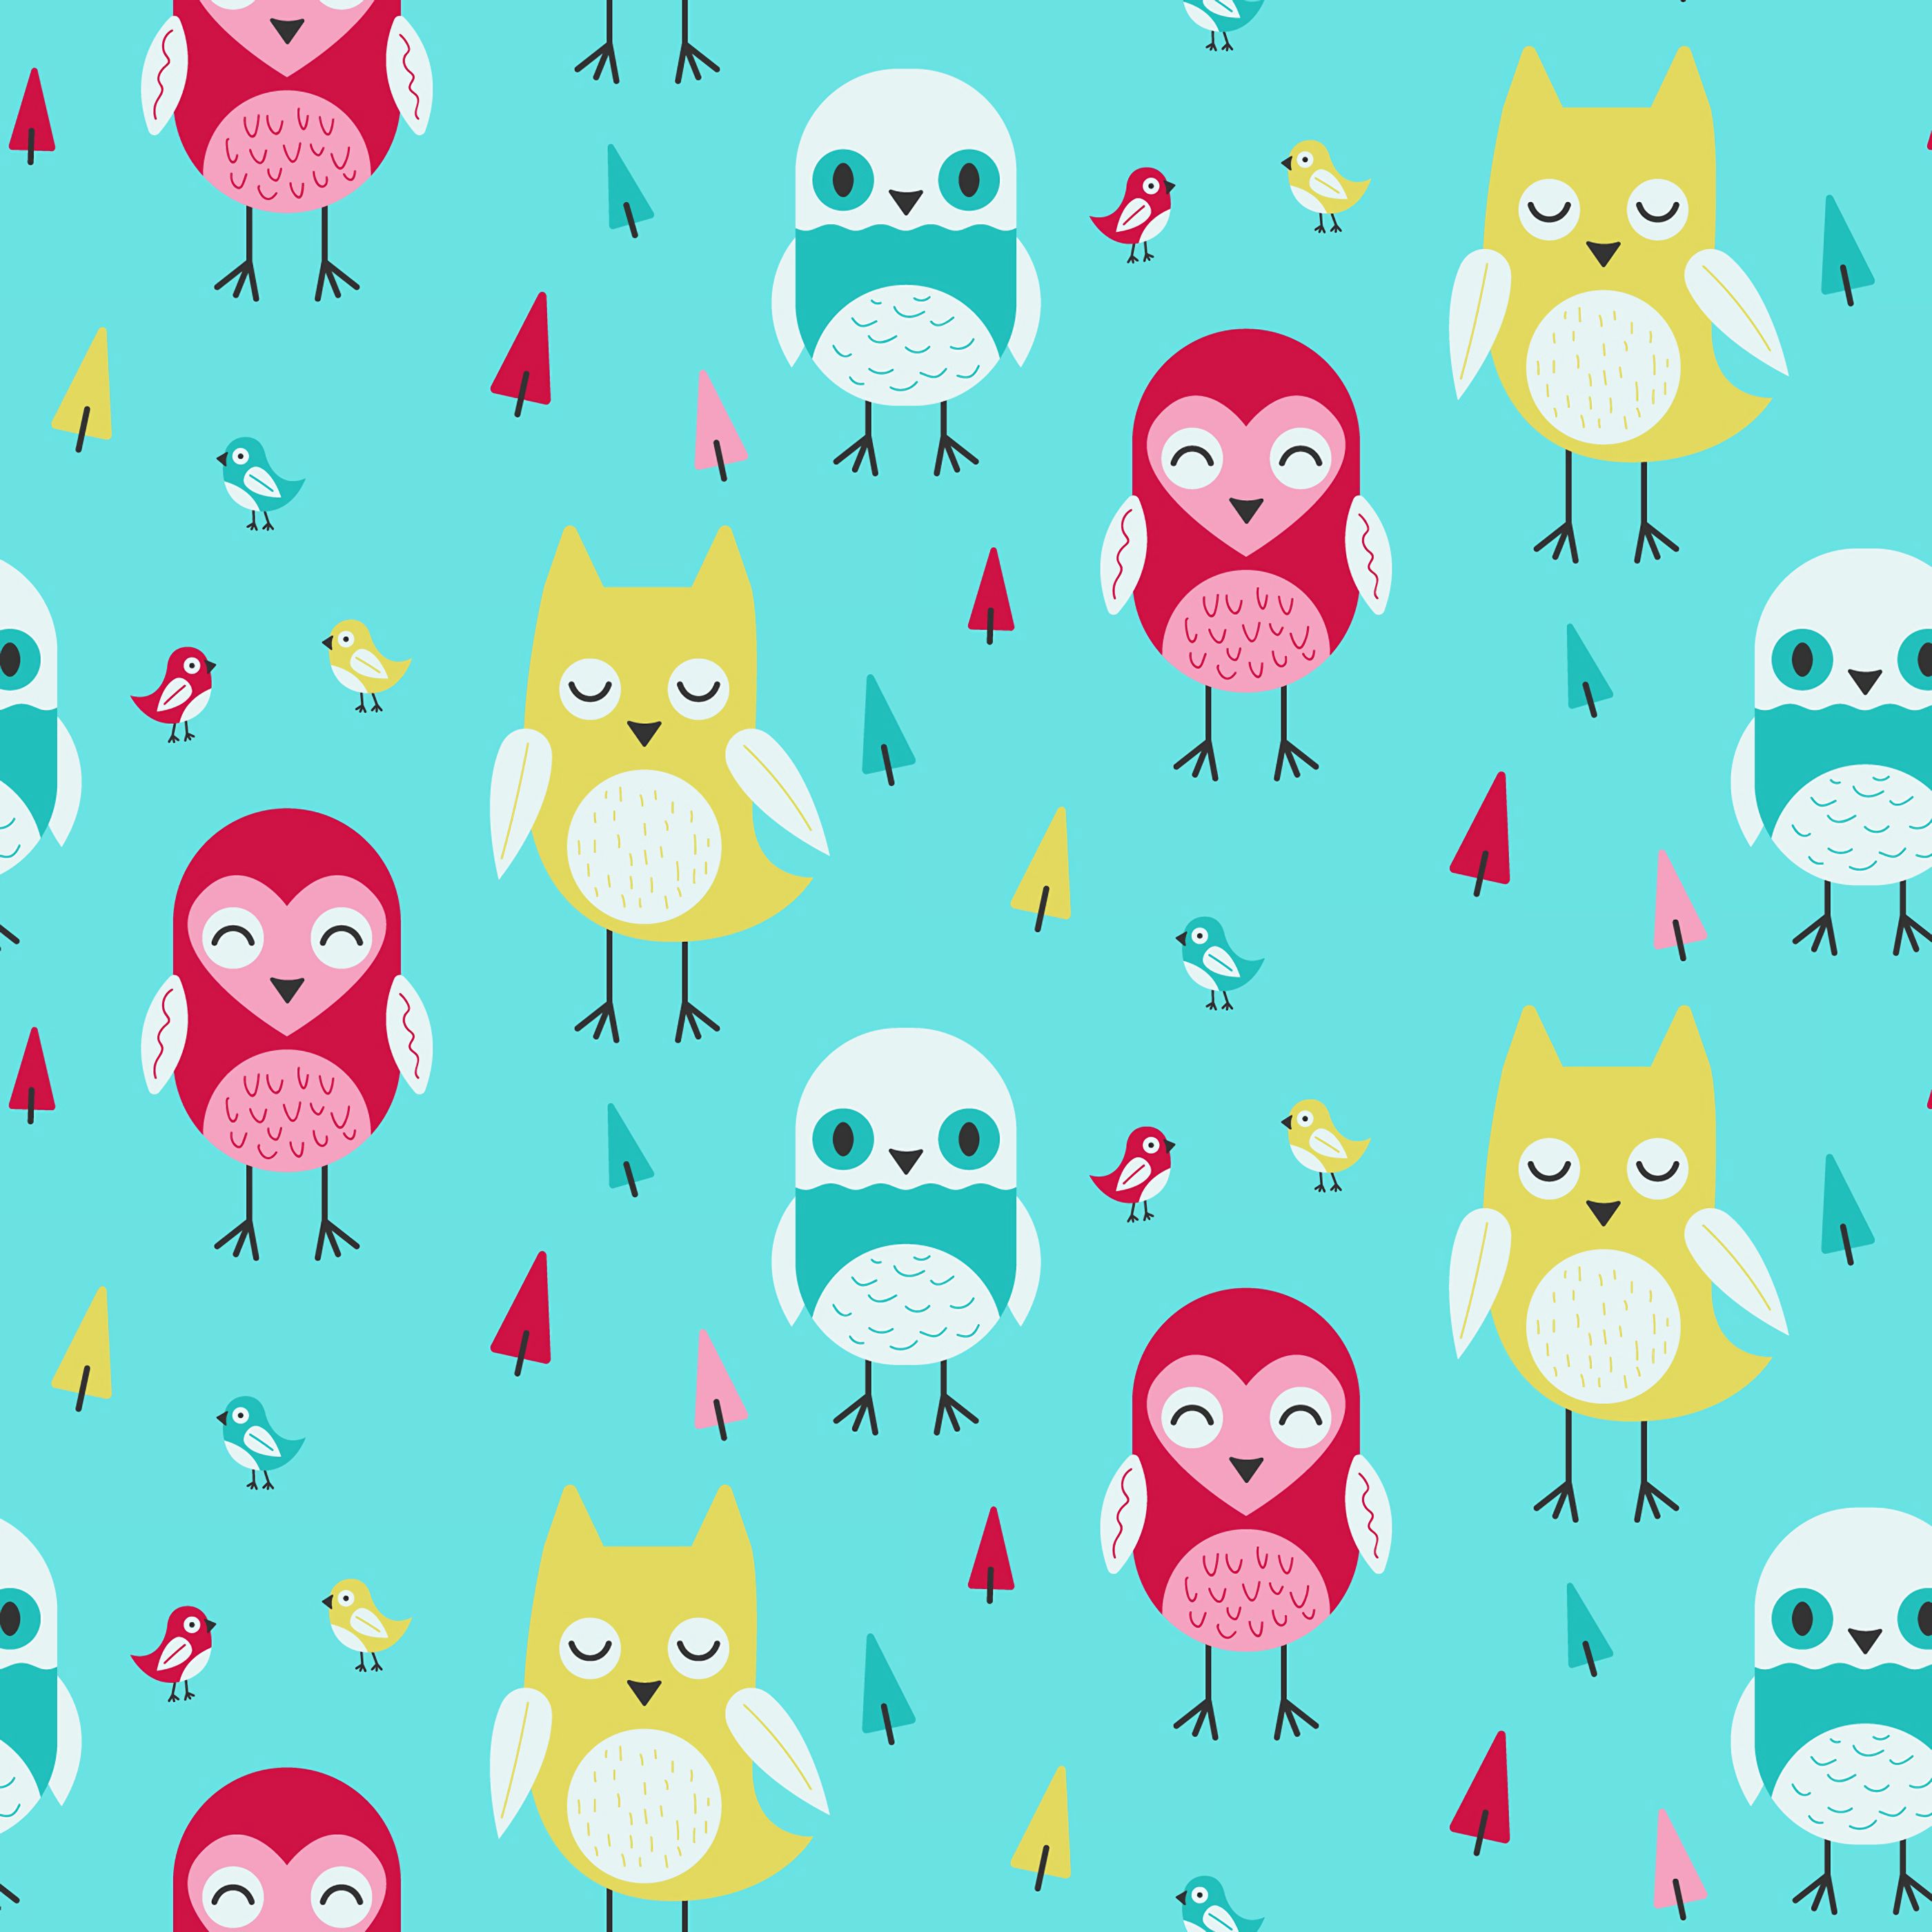 Patterns motley, multicolored, texture, owl 8k Backgrounds